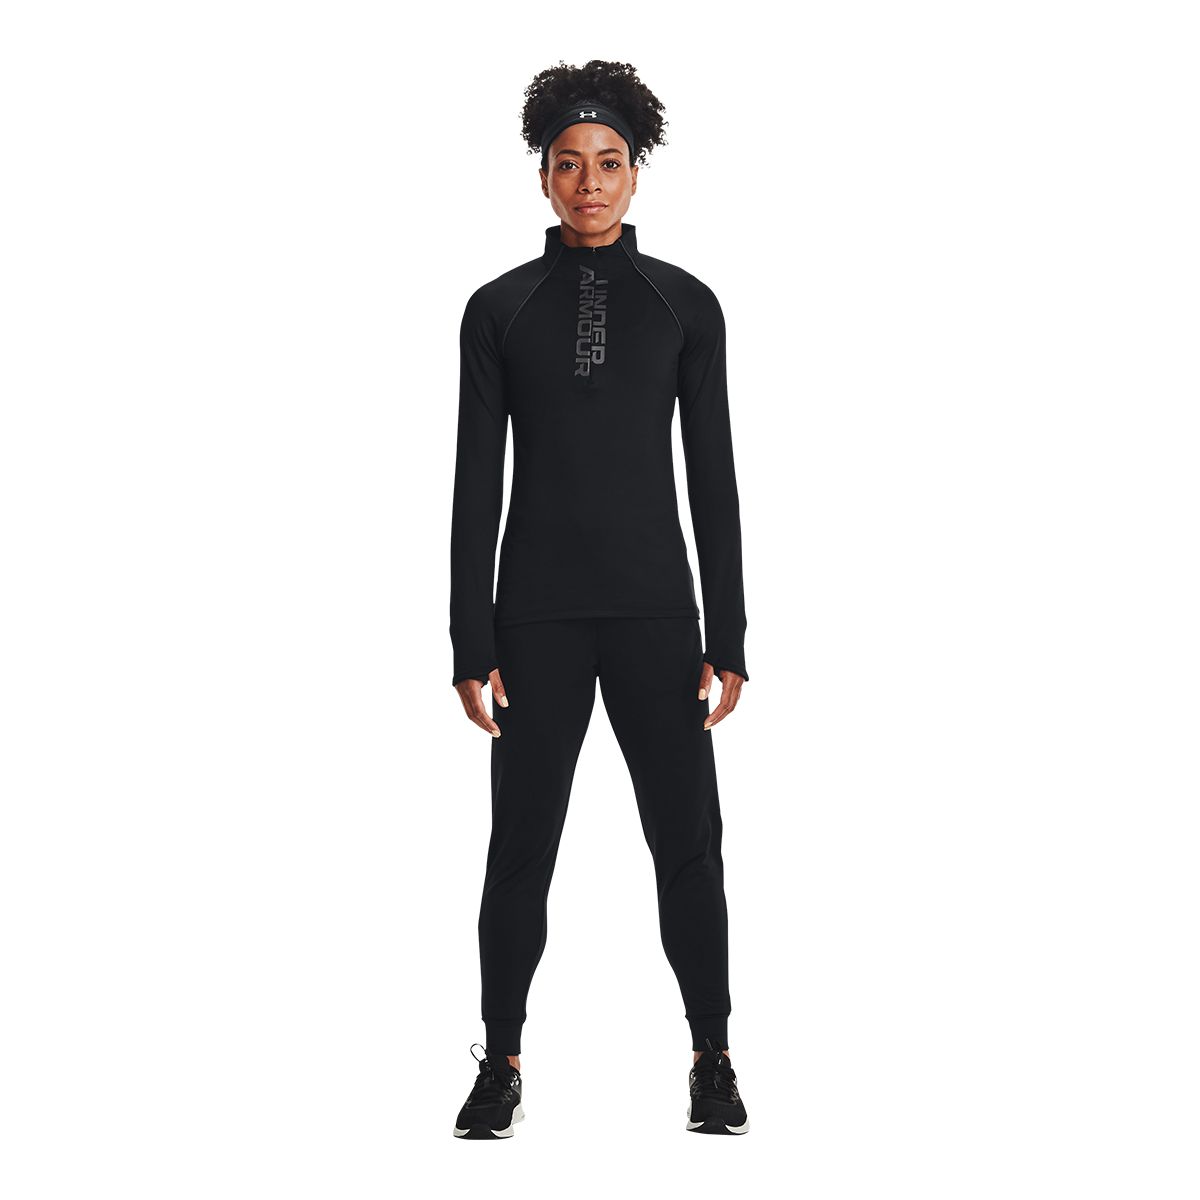 https://media-www.atmosphere.ca/product/div-03-softgoods/dpt-70-athletic-clothing/sdpt-02-womens/333479984/ua-w-armour-cg-pant-q421-bl-black-l--f0421ee1-2761-4295-9bb2-dc5ad45ef684-jpgrendition.jpg?imdensity=1&imwidth=1244&impolicy=mZoom